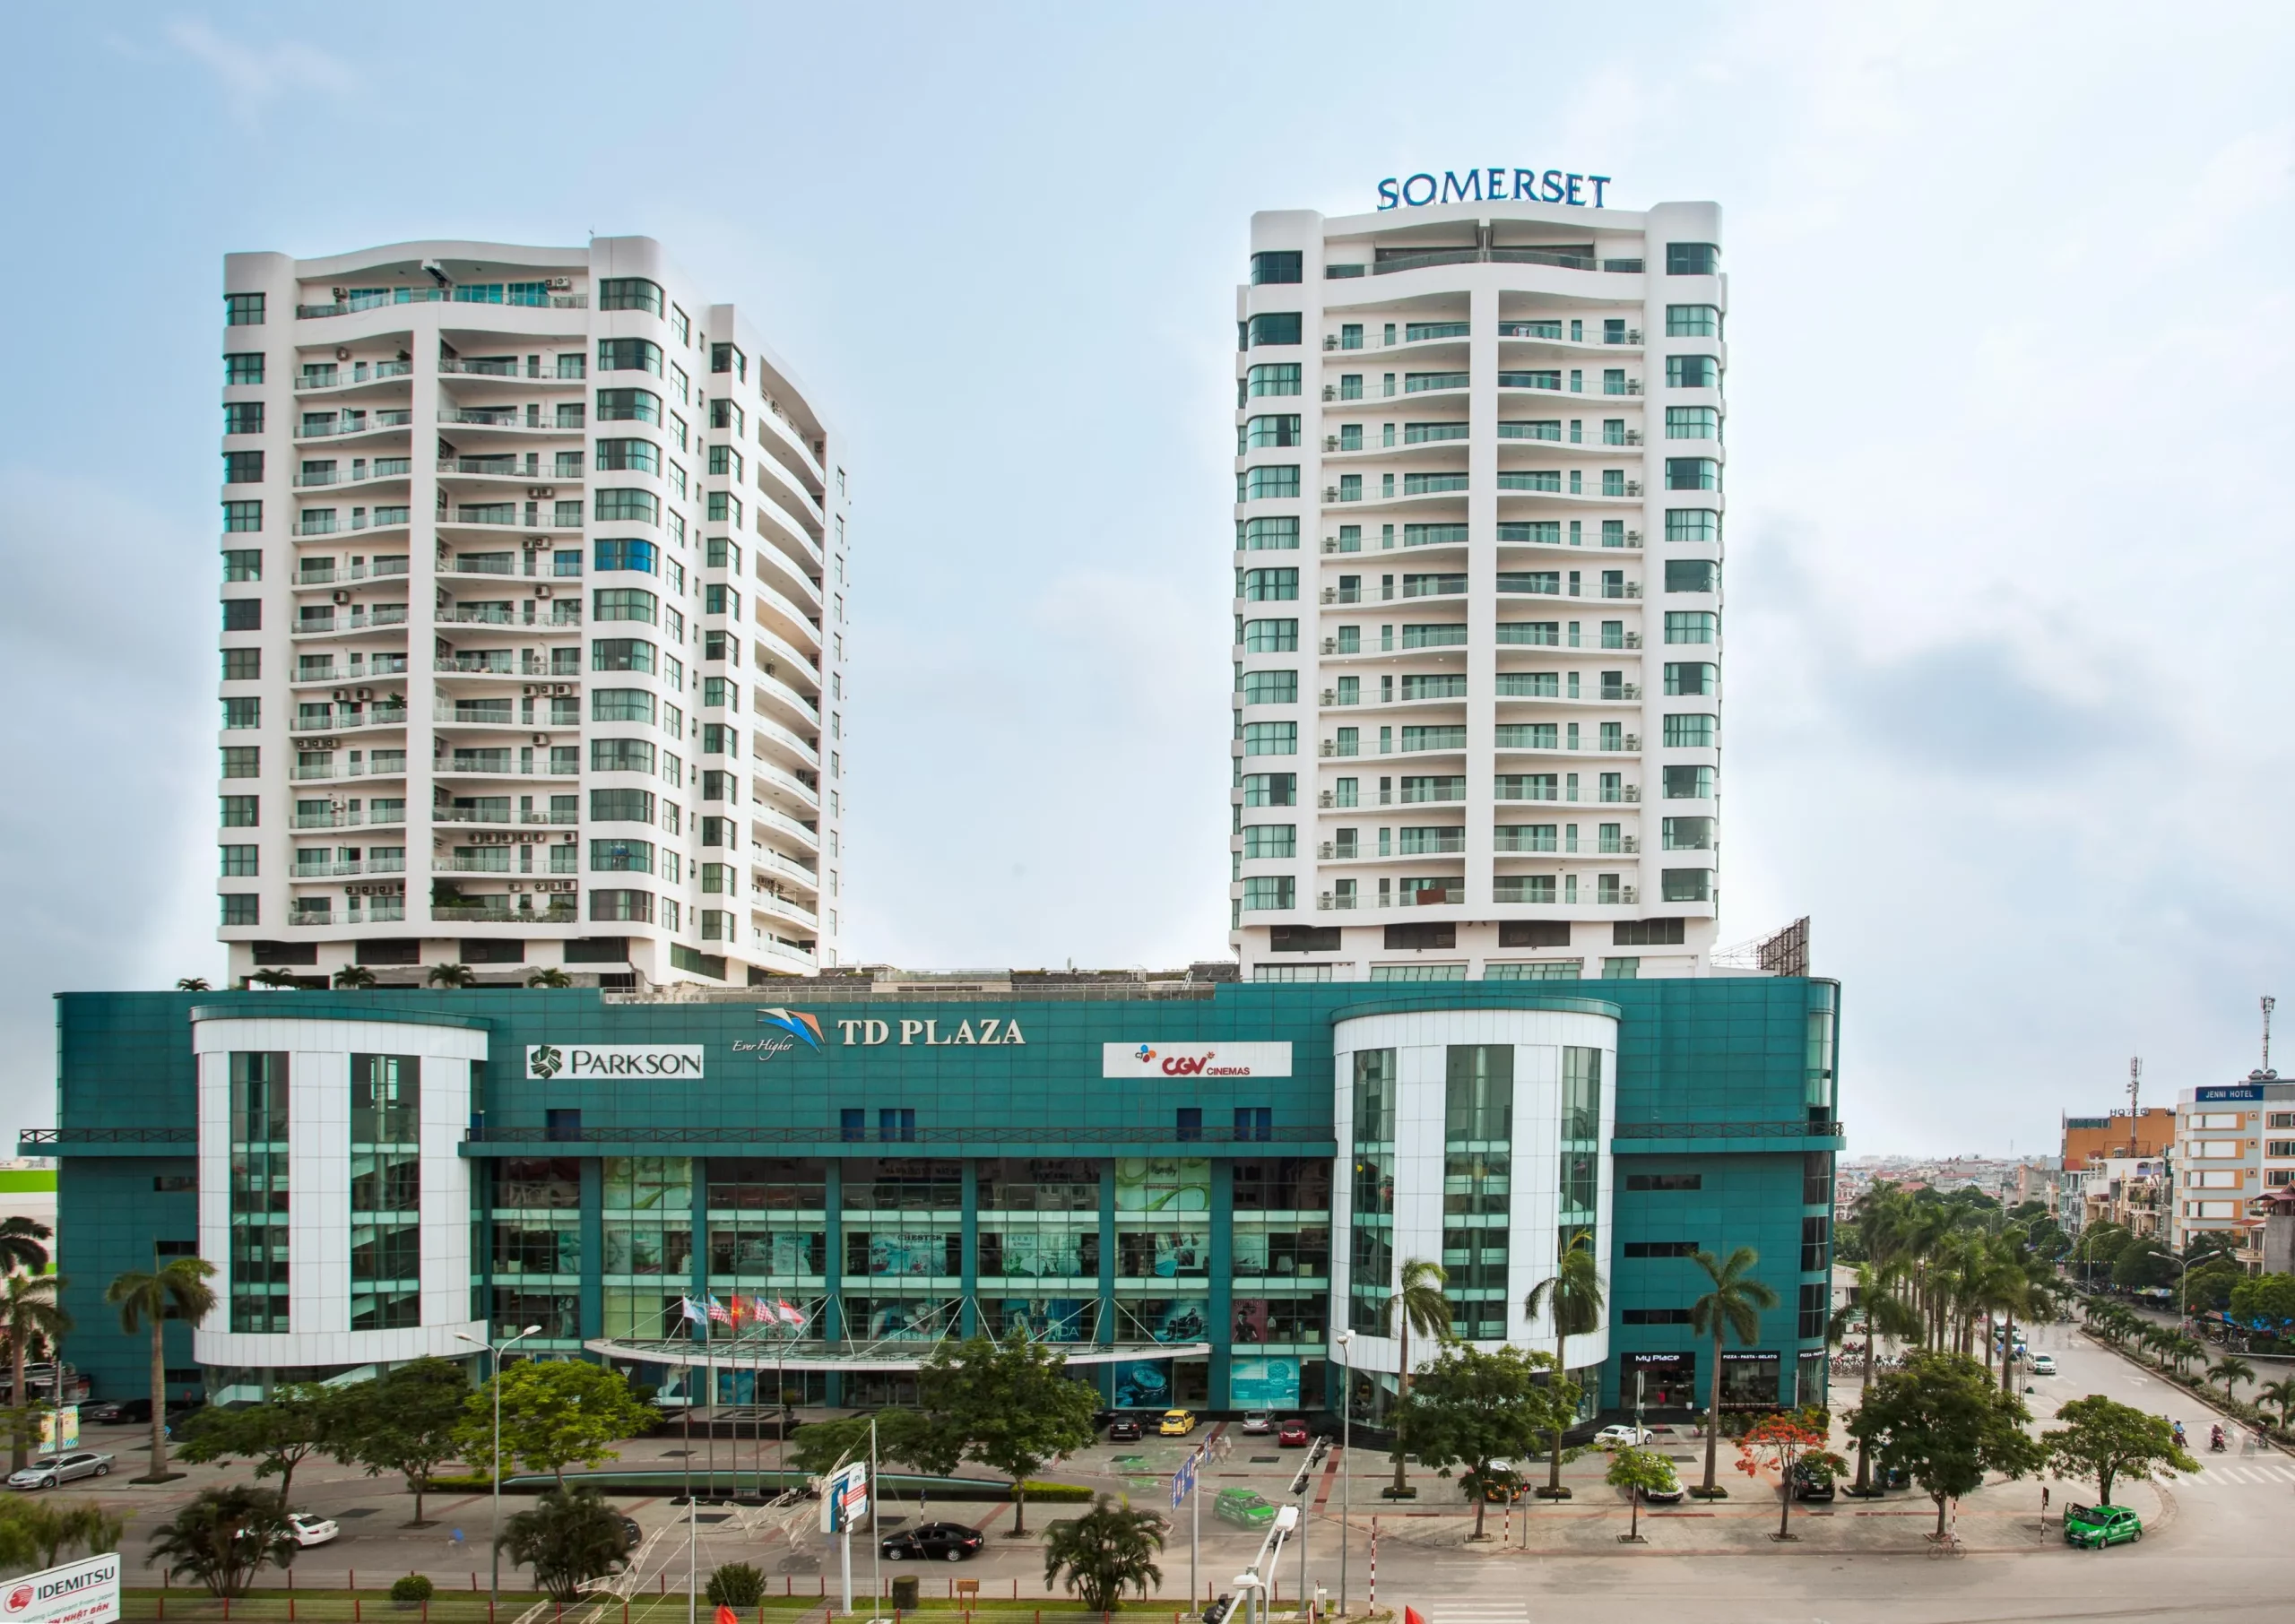 somerset central td hải phòng city